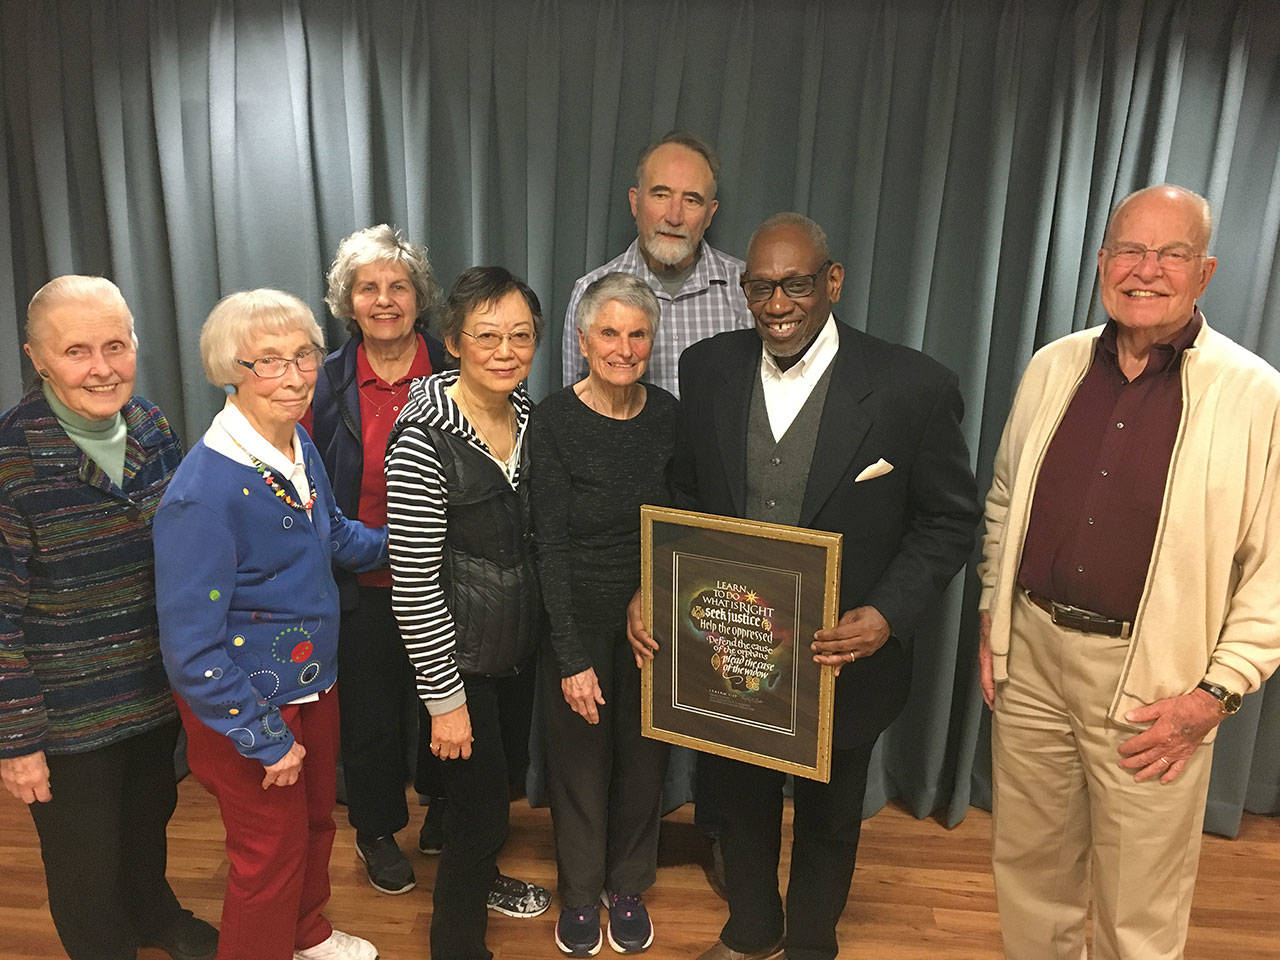 The Diversity Awareness Partners at Mercer Island’s Covenant Shores retirement community present activist Harold Spooner with the “Spirit of Martin Luther King Jr.” award on April 3. Photo courtesy of Greg Asimakoupoulos